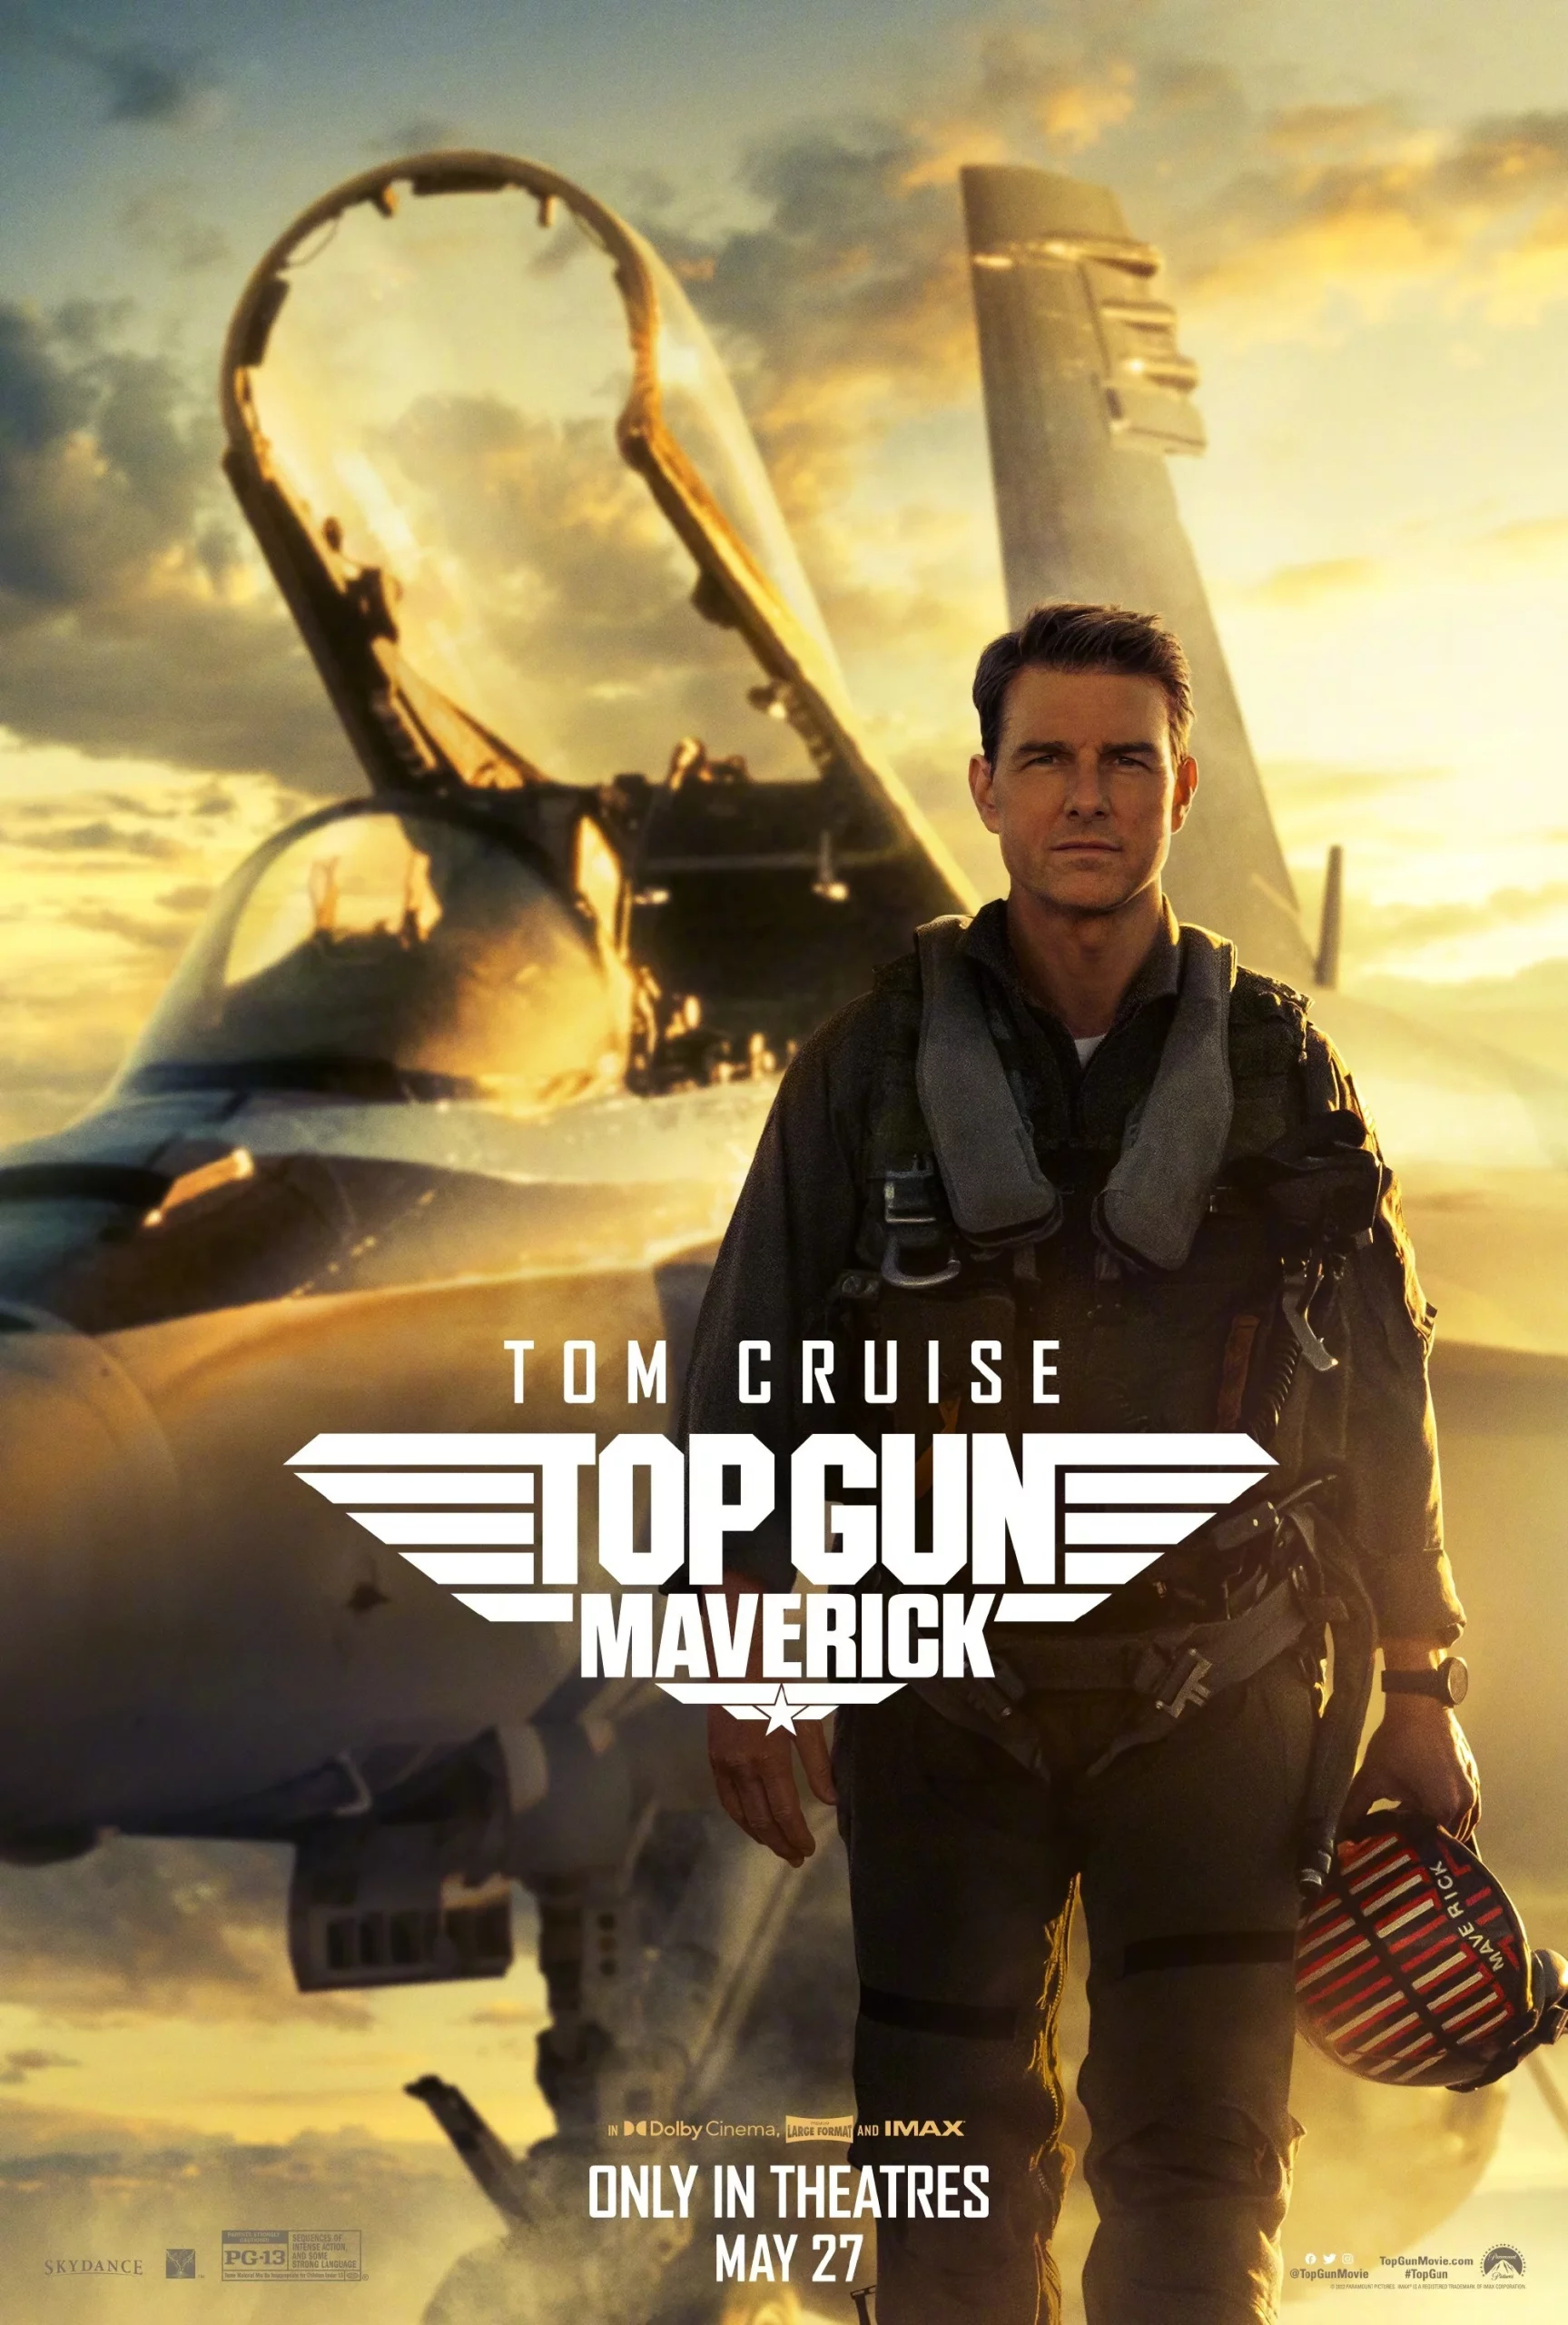 Top Gun: Maverick‎" will premiere at the Cannes Film Festival in May!